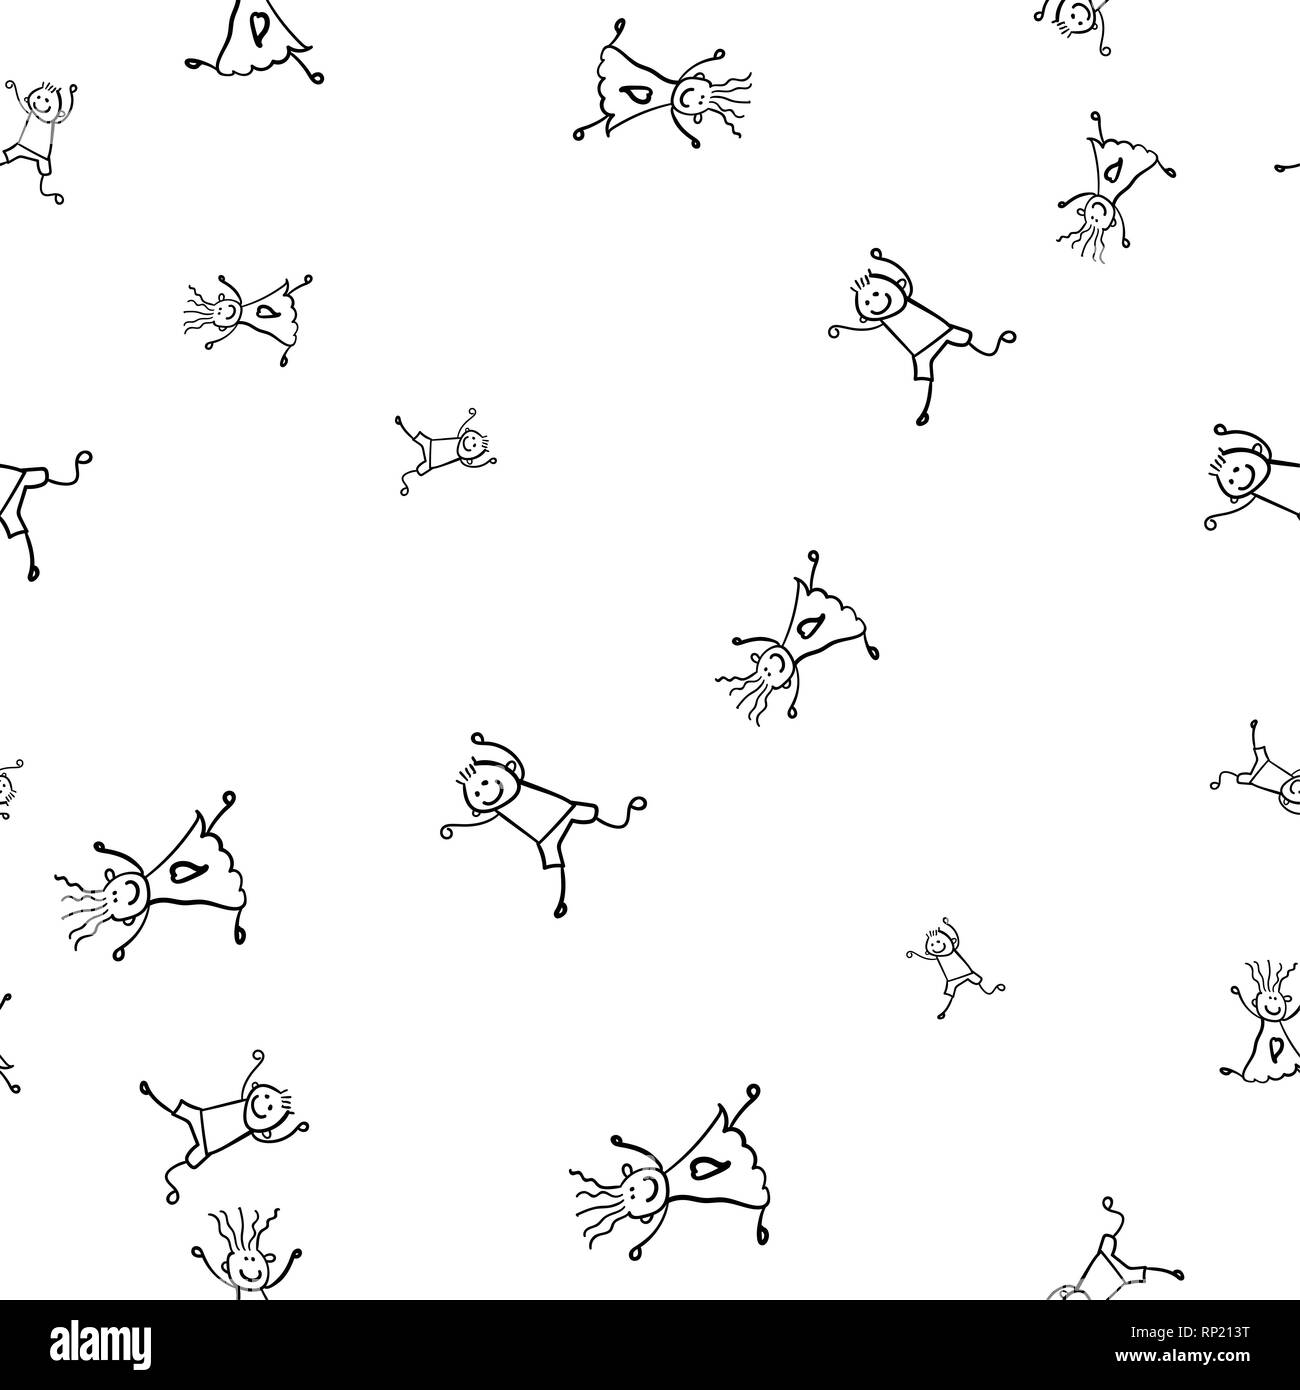 Kids seamless pattern in doodle style.  illustration on white background. Stock Photo